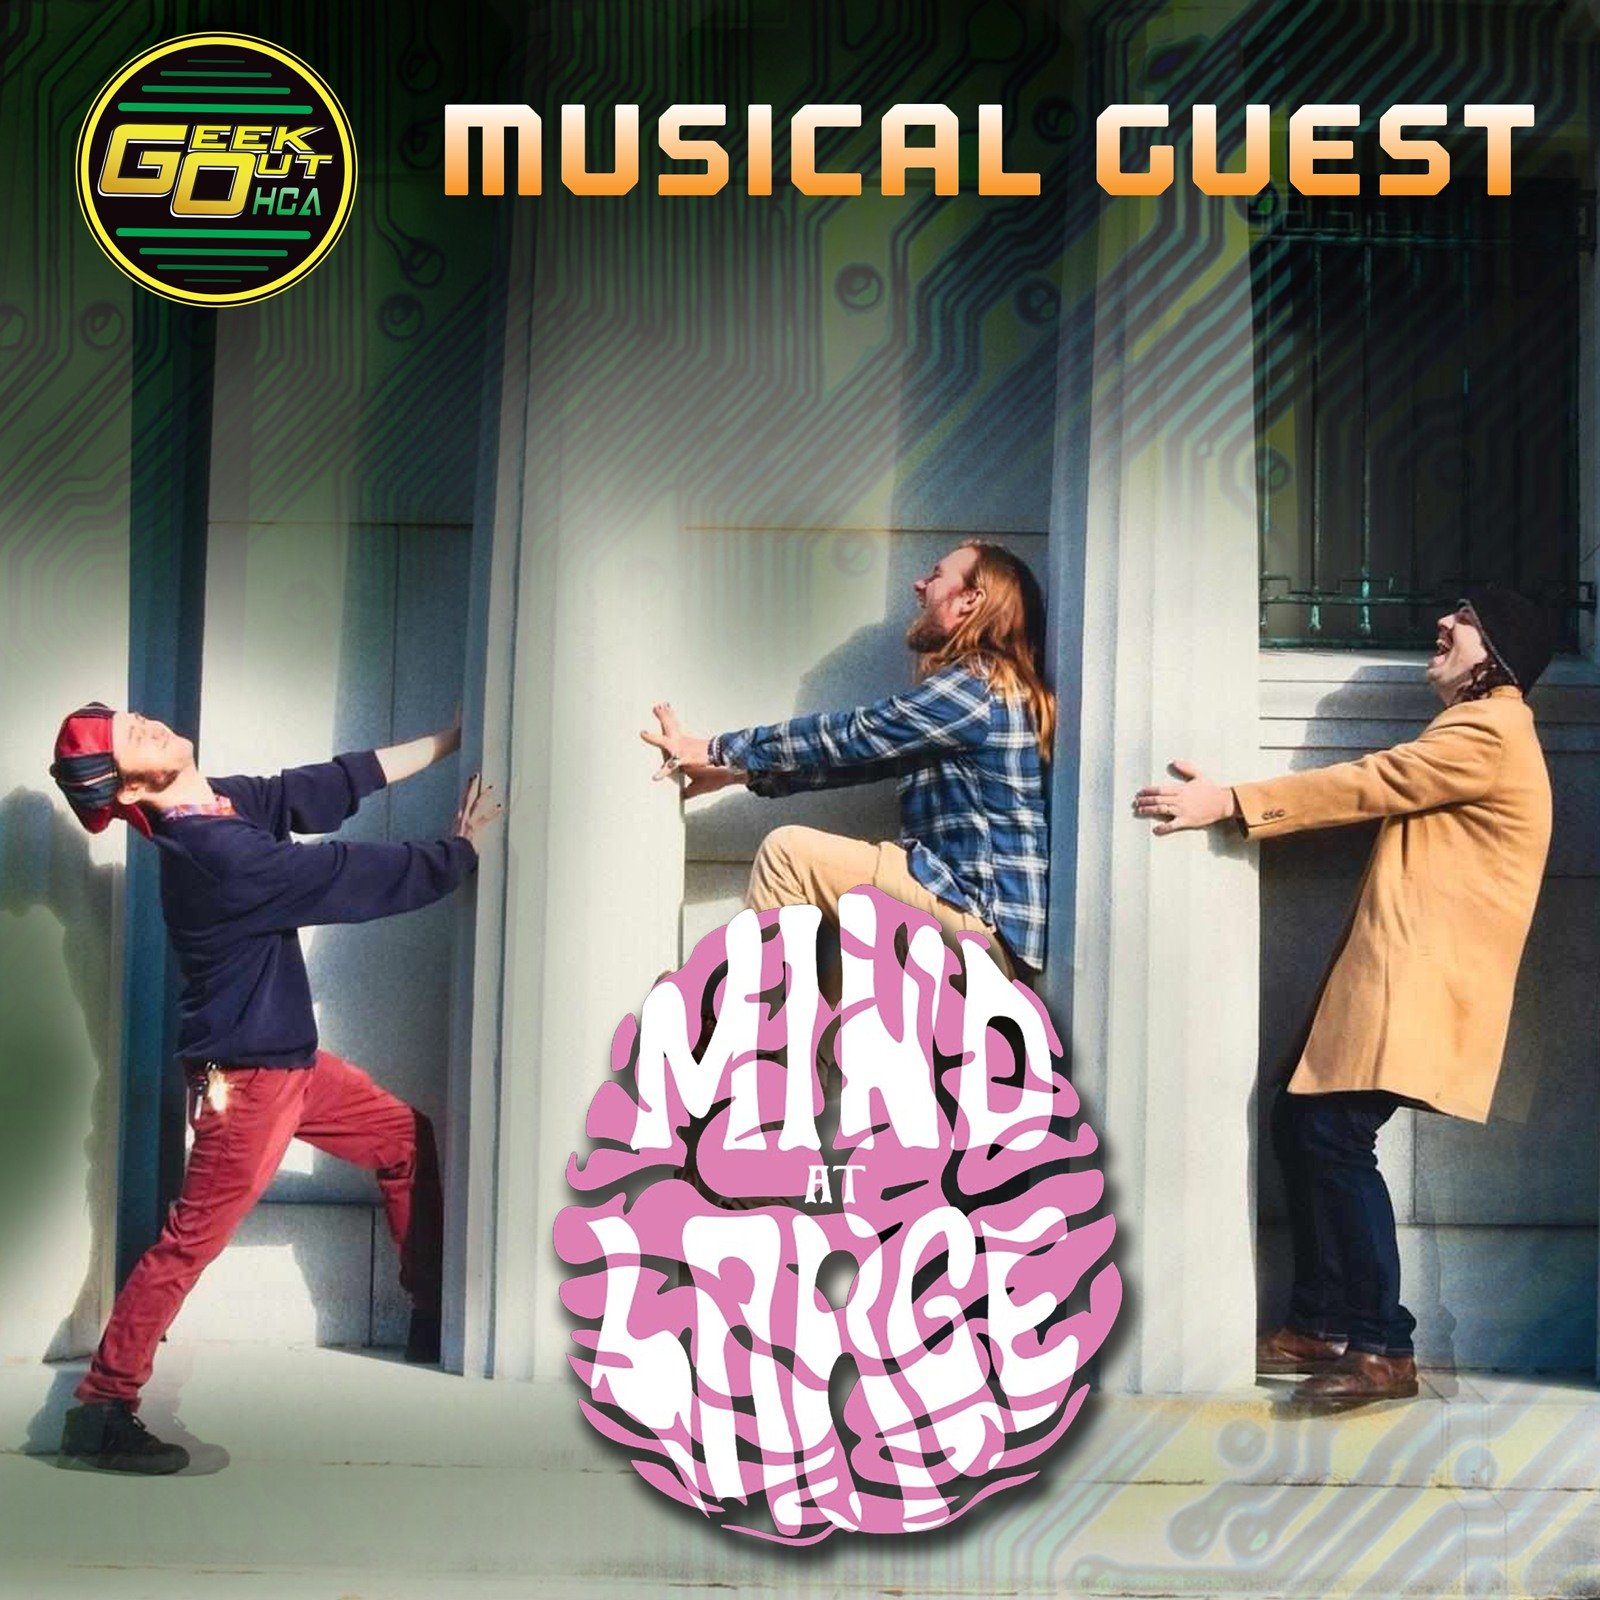   Mind at Large will be taking to main stage this year to melt your faces off! Mind at Large is an exceptionally eclectic powerhouse from Southwestern Ohio. Blending progressive rock, funk, grunge, jazz, and electronic, their musical territory reache